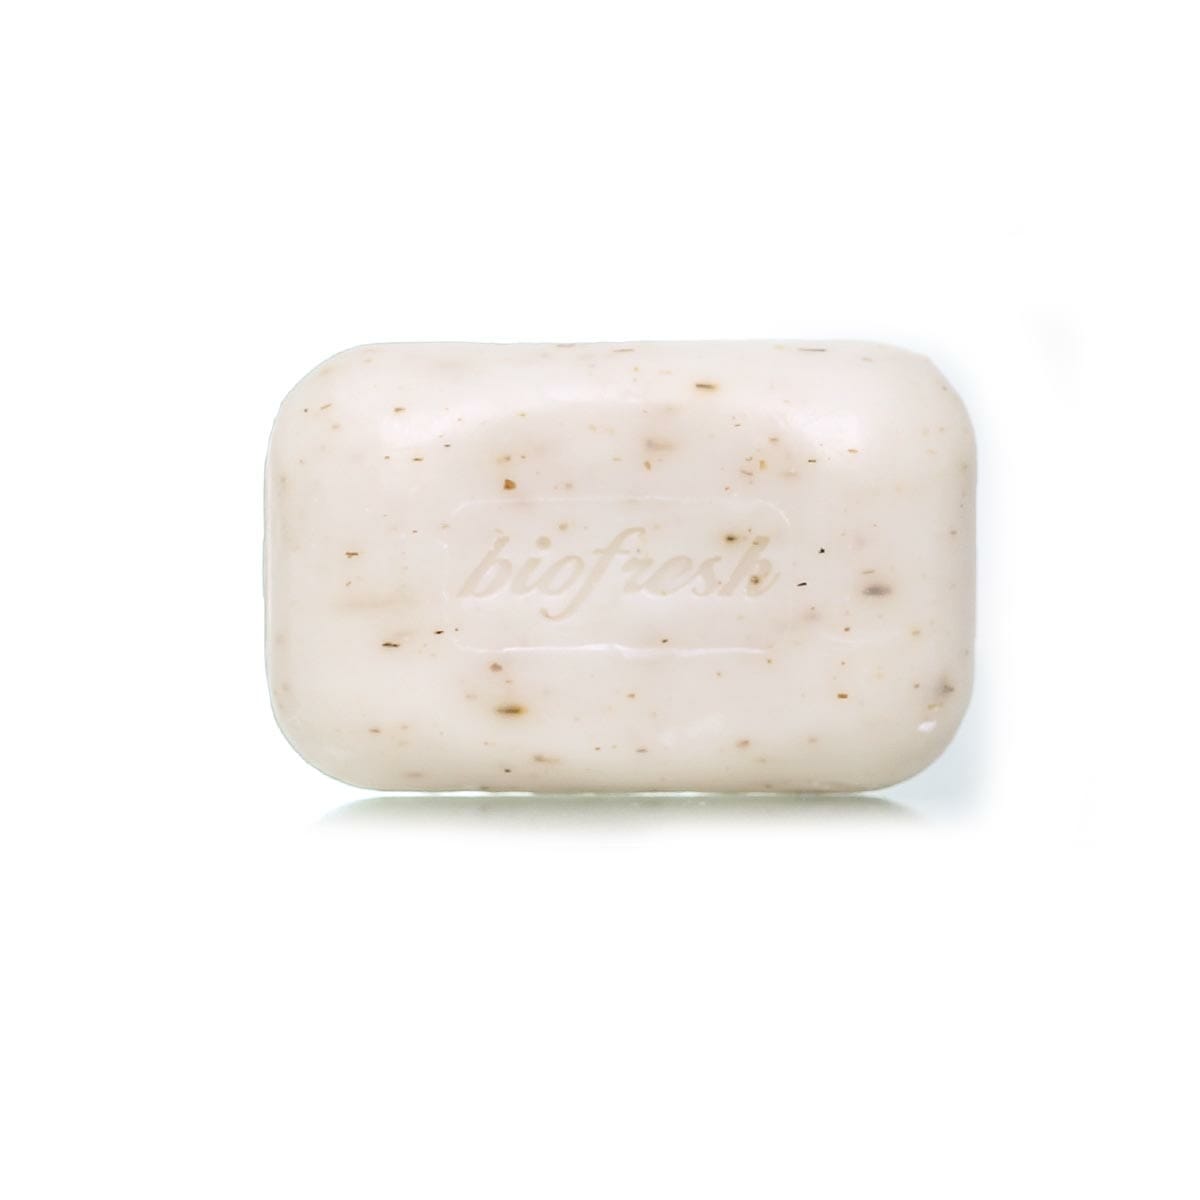 anticellulite_body_soap_with_lavender_extract_herbs_of-bulgaria_biofresh_znzmedical.gr